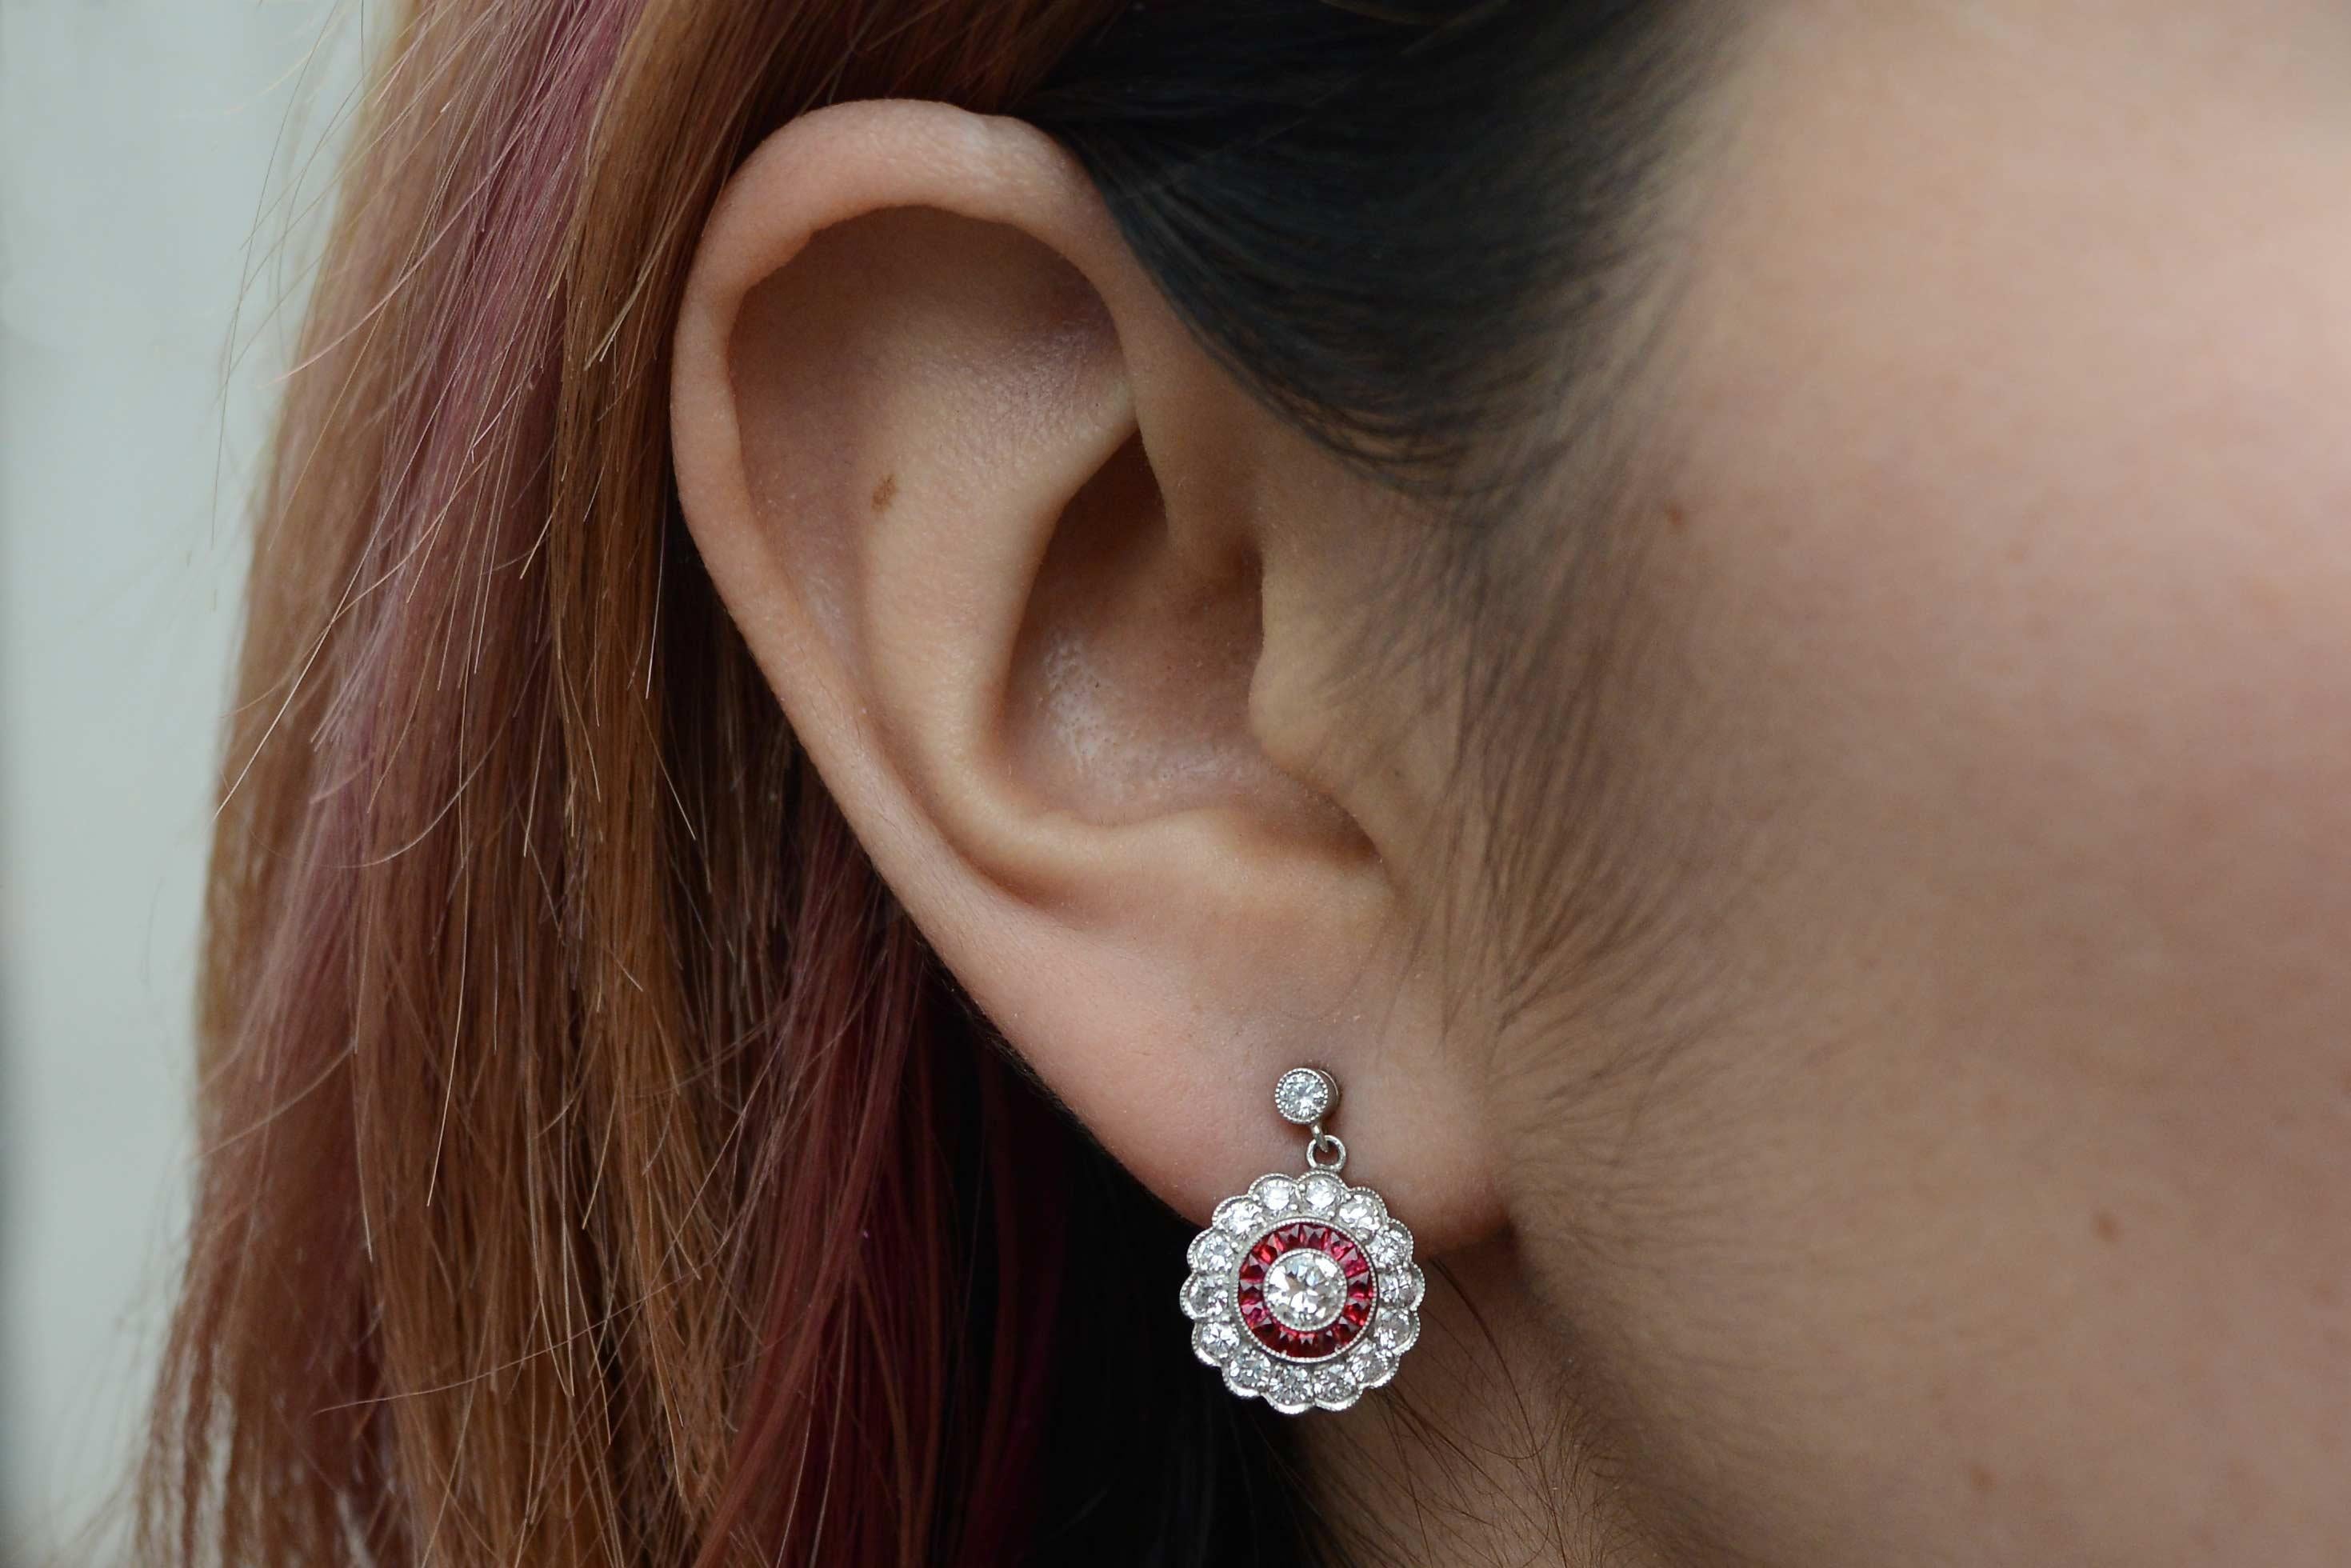 A strikingly rich and decadent combo of fiery diamonds and juicy rubies team up in these Edwardian revival drop earrings. With the two periods often crossing over into the Art Deco era, these scalloped, floral motif halo dangles are formed by a